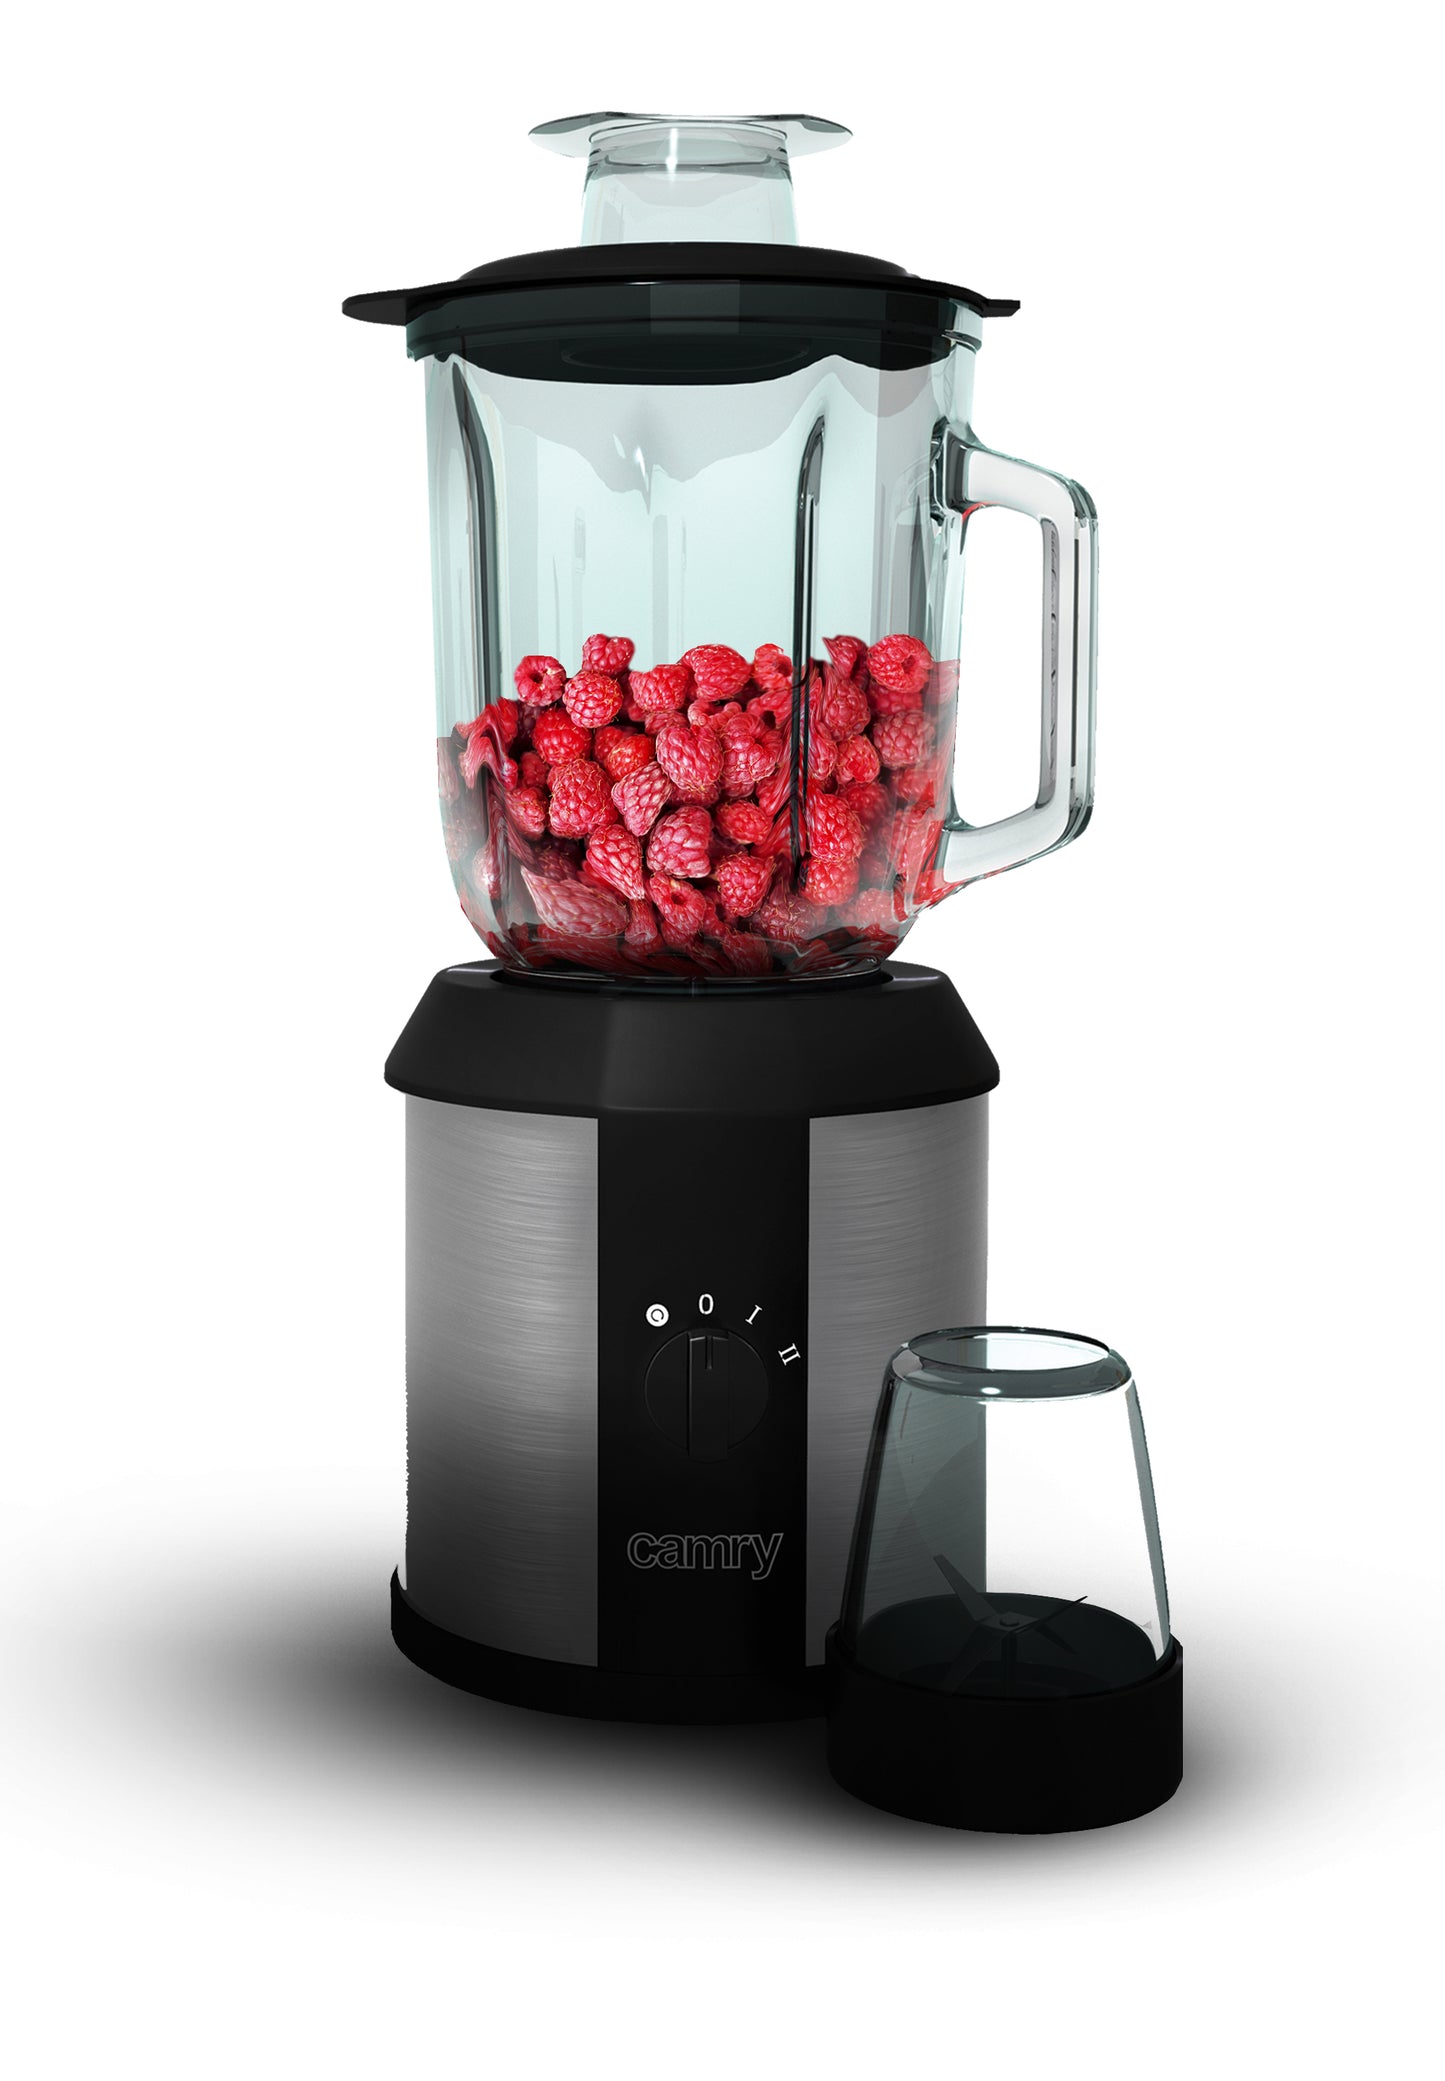 Camry CR4077 Blender 1000W with Crush Ice and Pulse Function